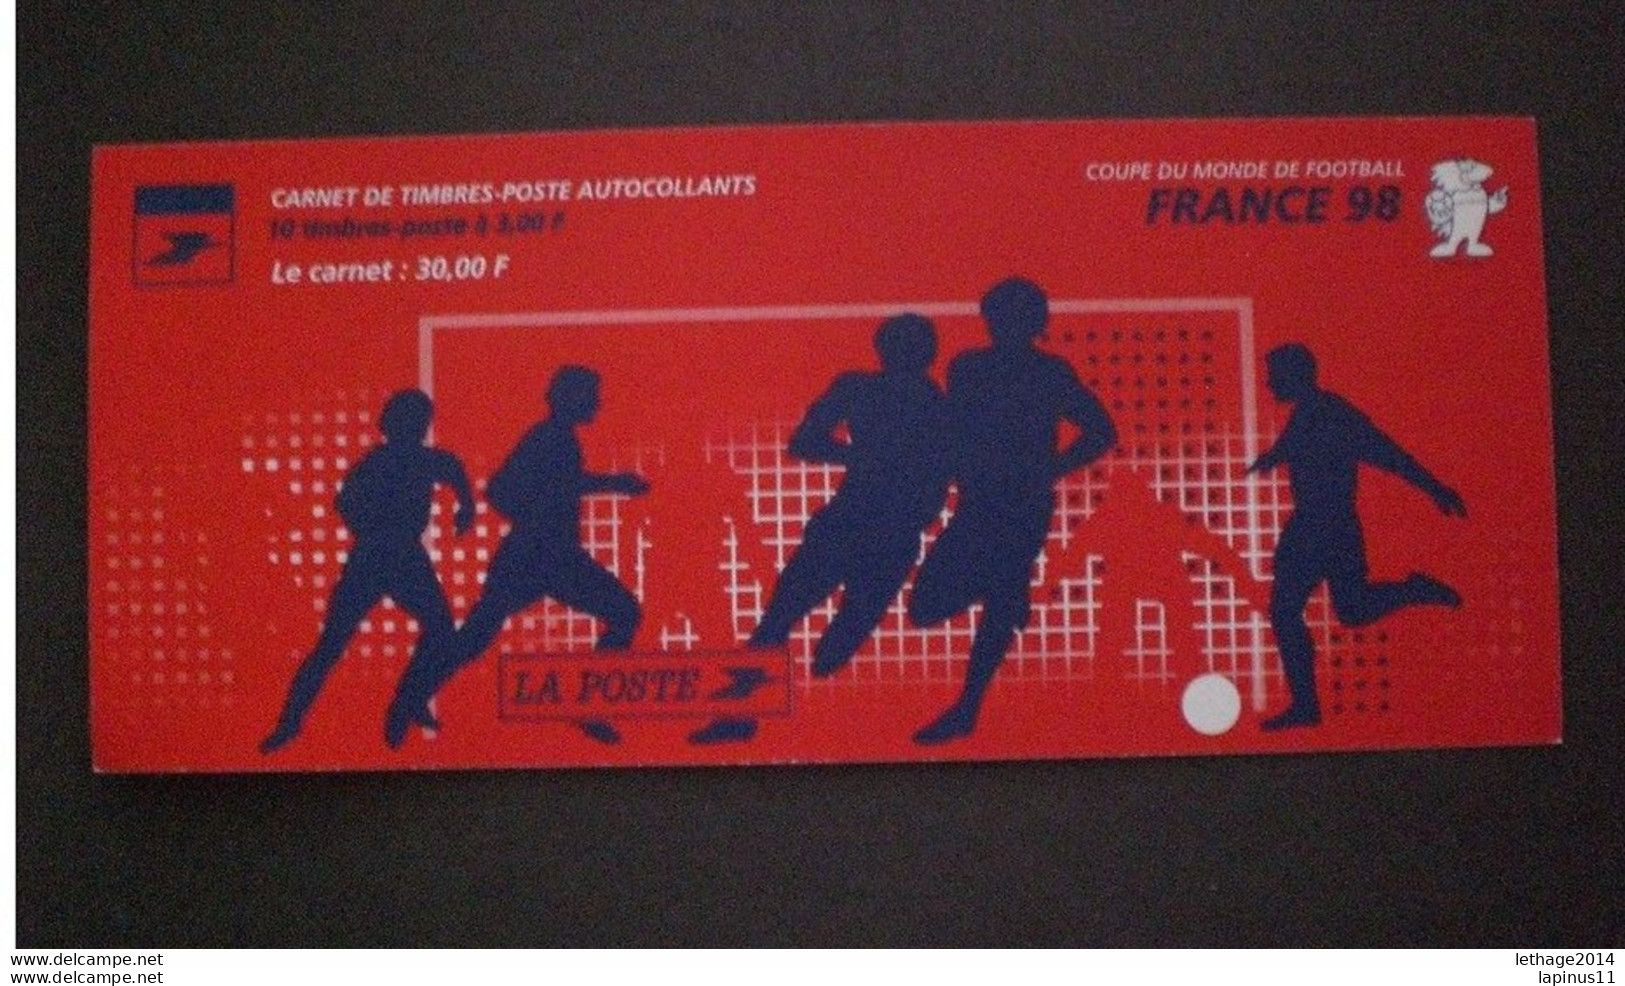 FRANCE 1998 Football World Cup - France - Self-adhesive Stamp CARNETS - Carnets